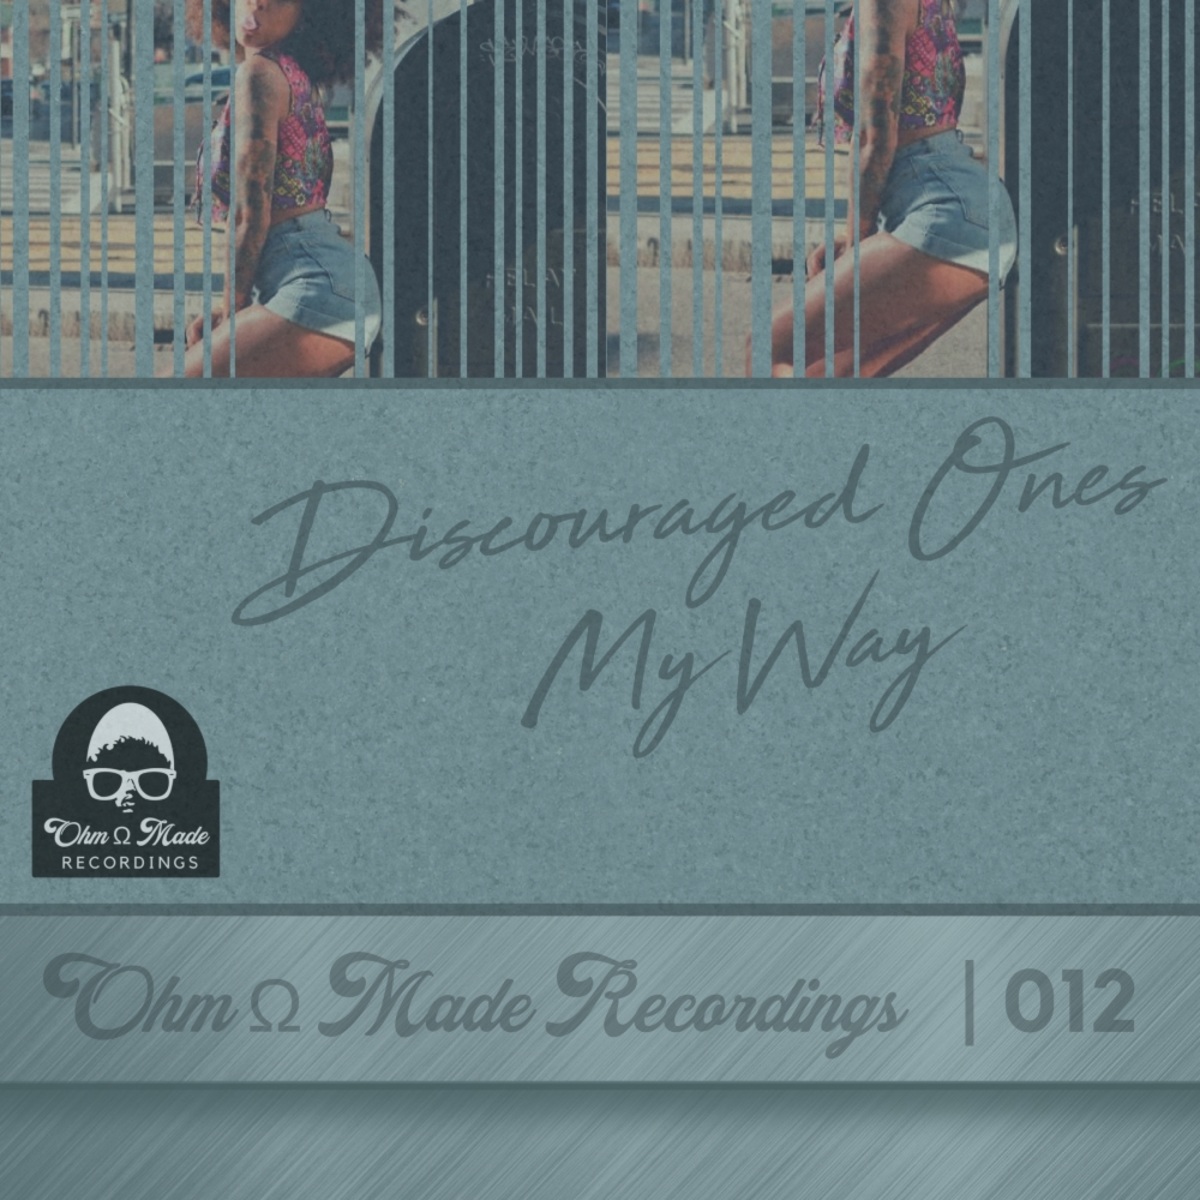 Discouraged Ones - My Way / Ohm Made Recordings